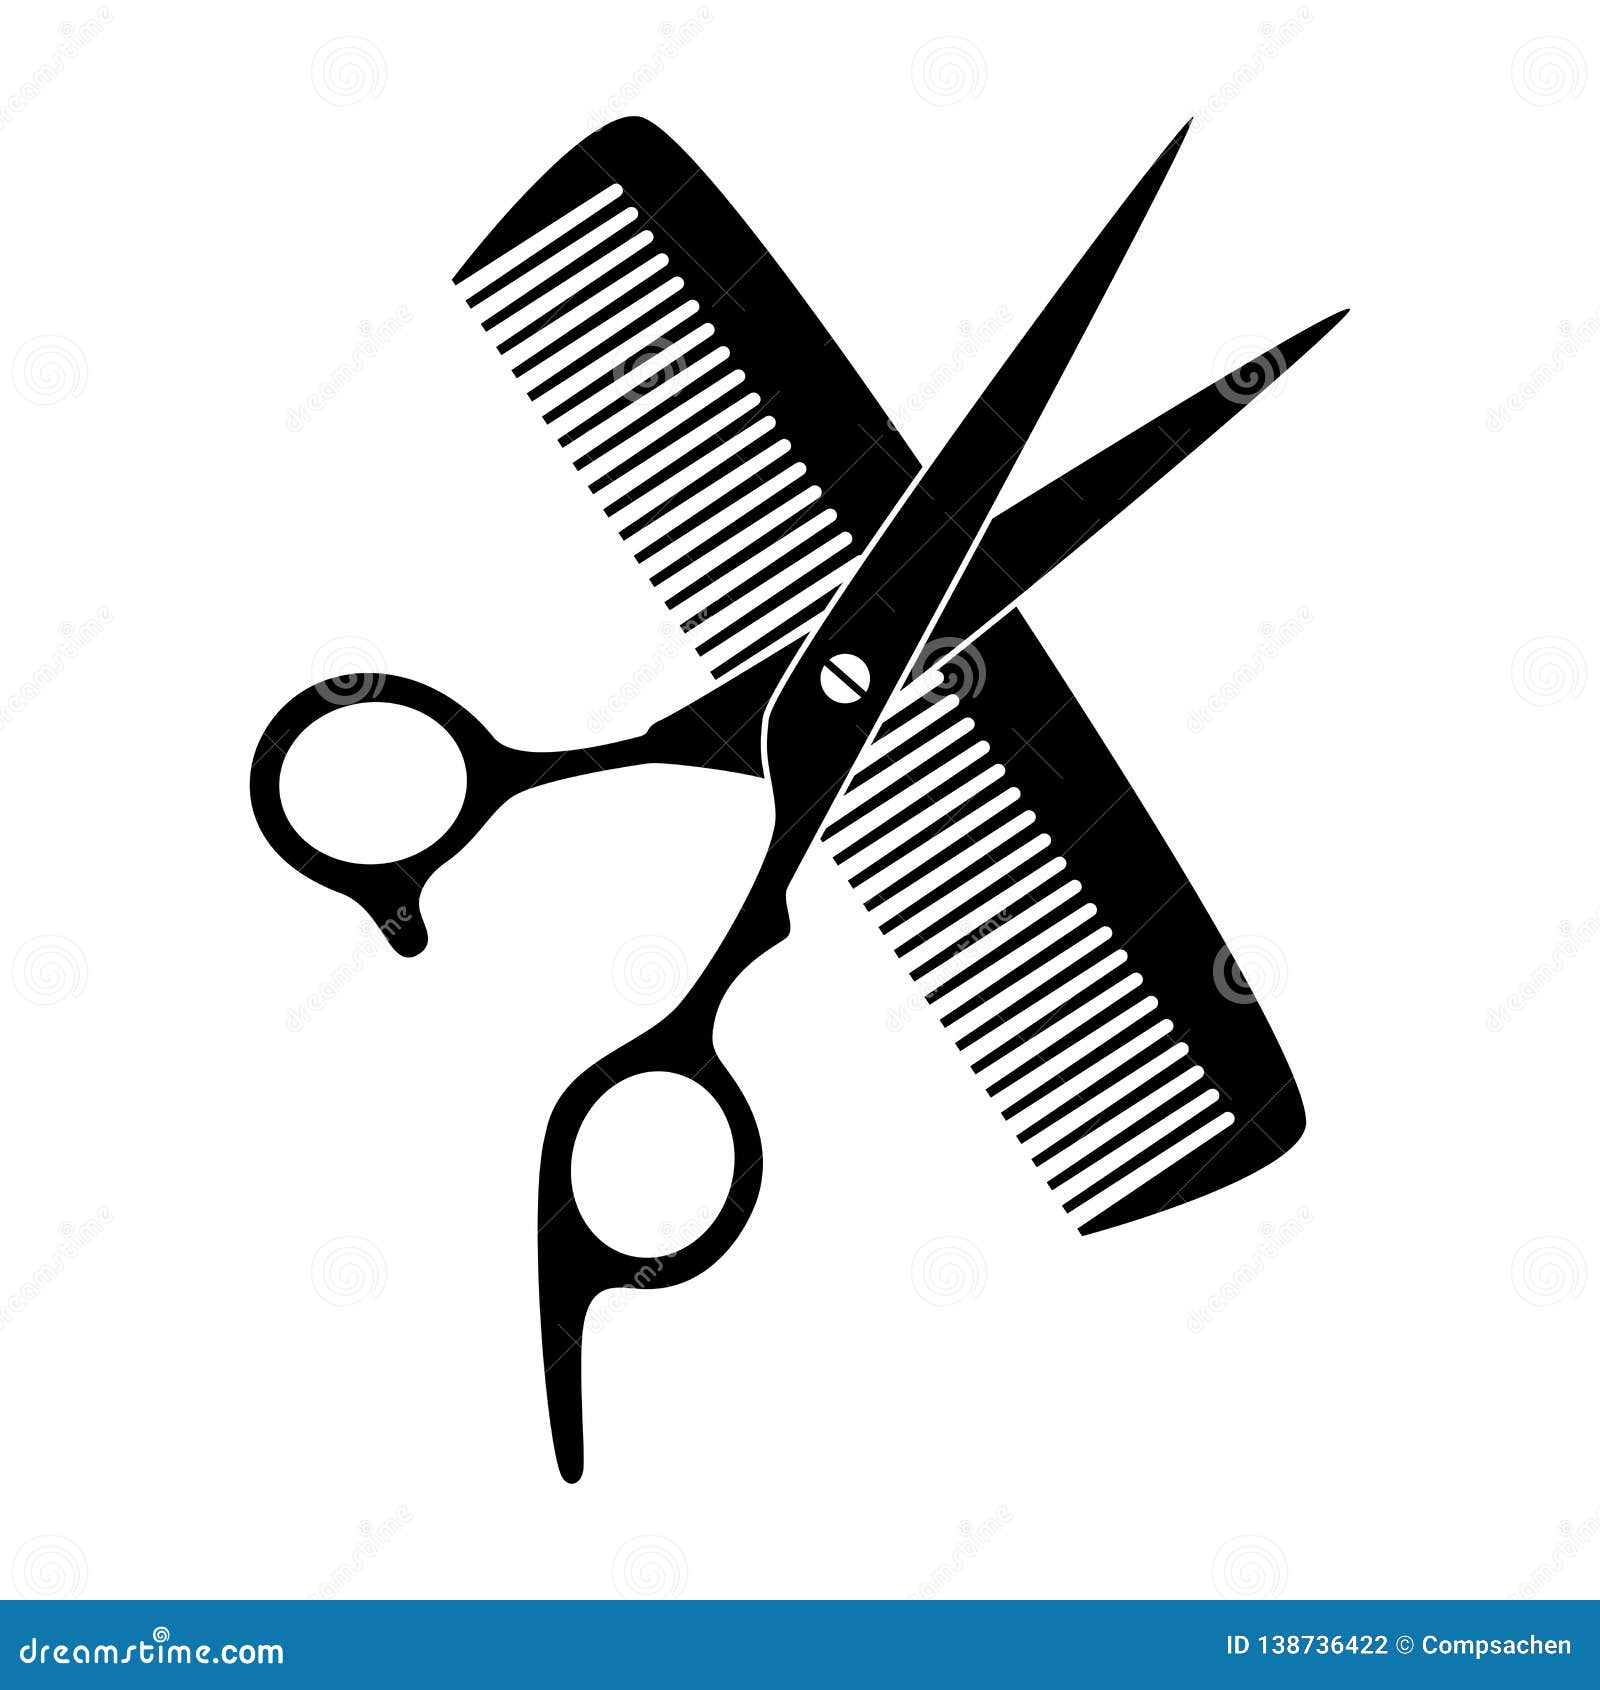 scissors, comb and razor in black, hairdresser and barber tools logo